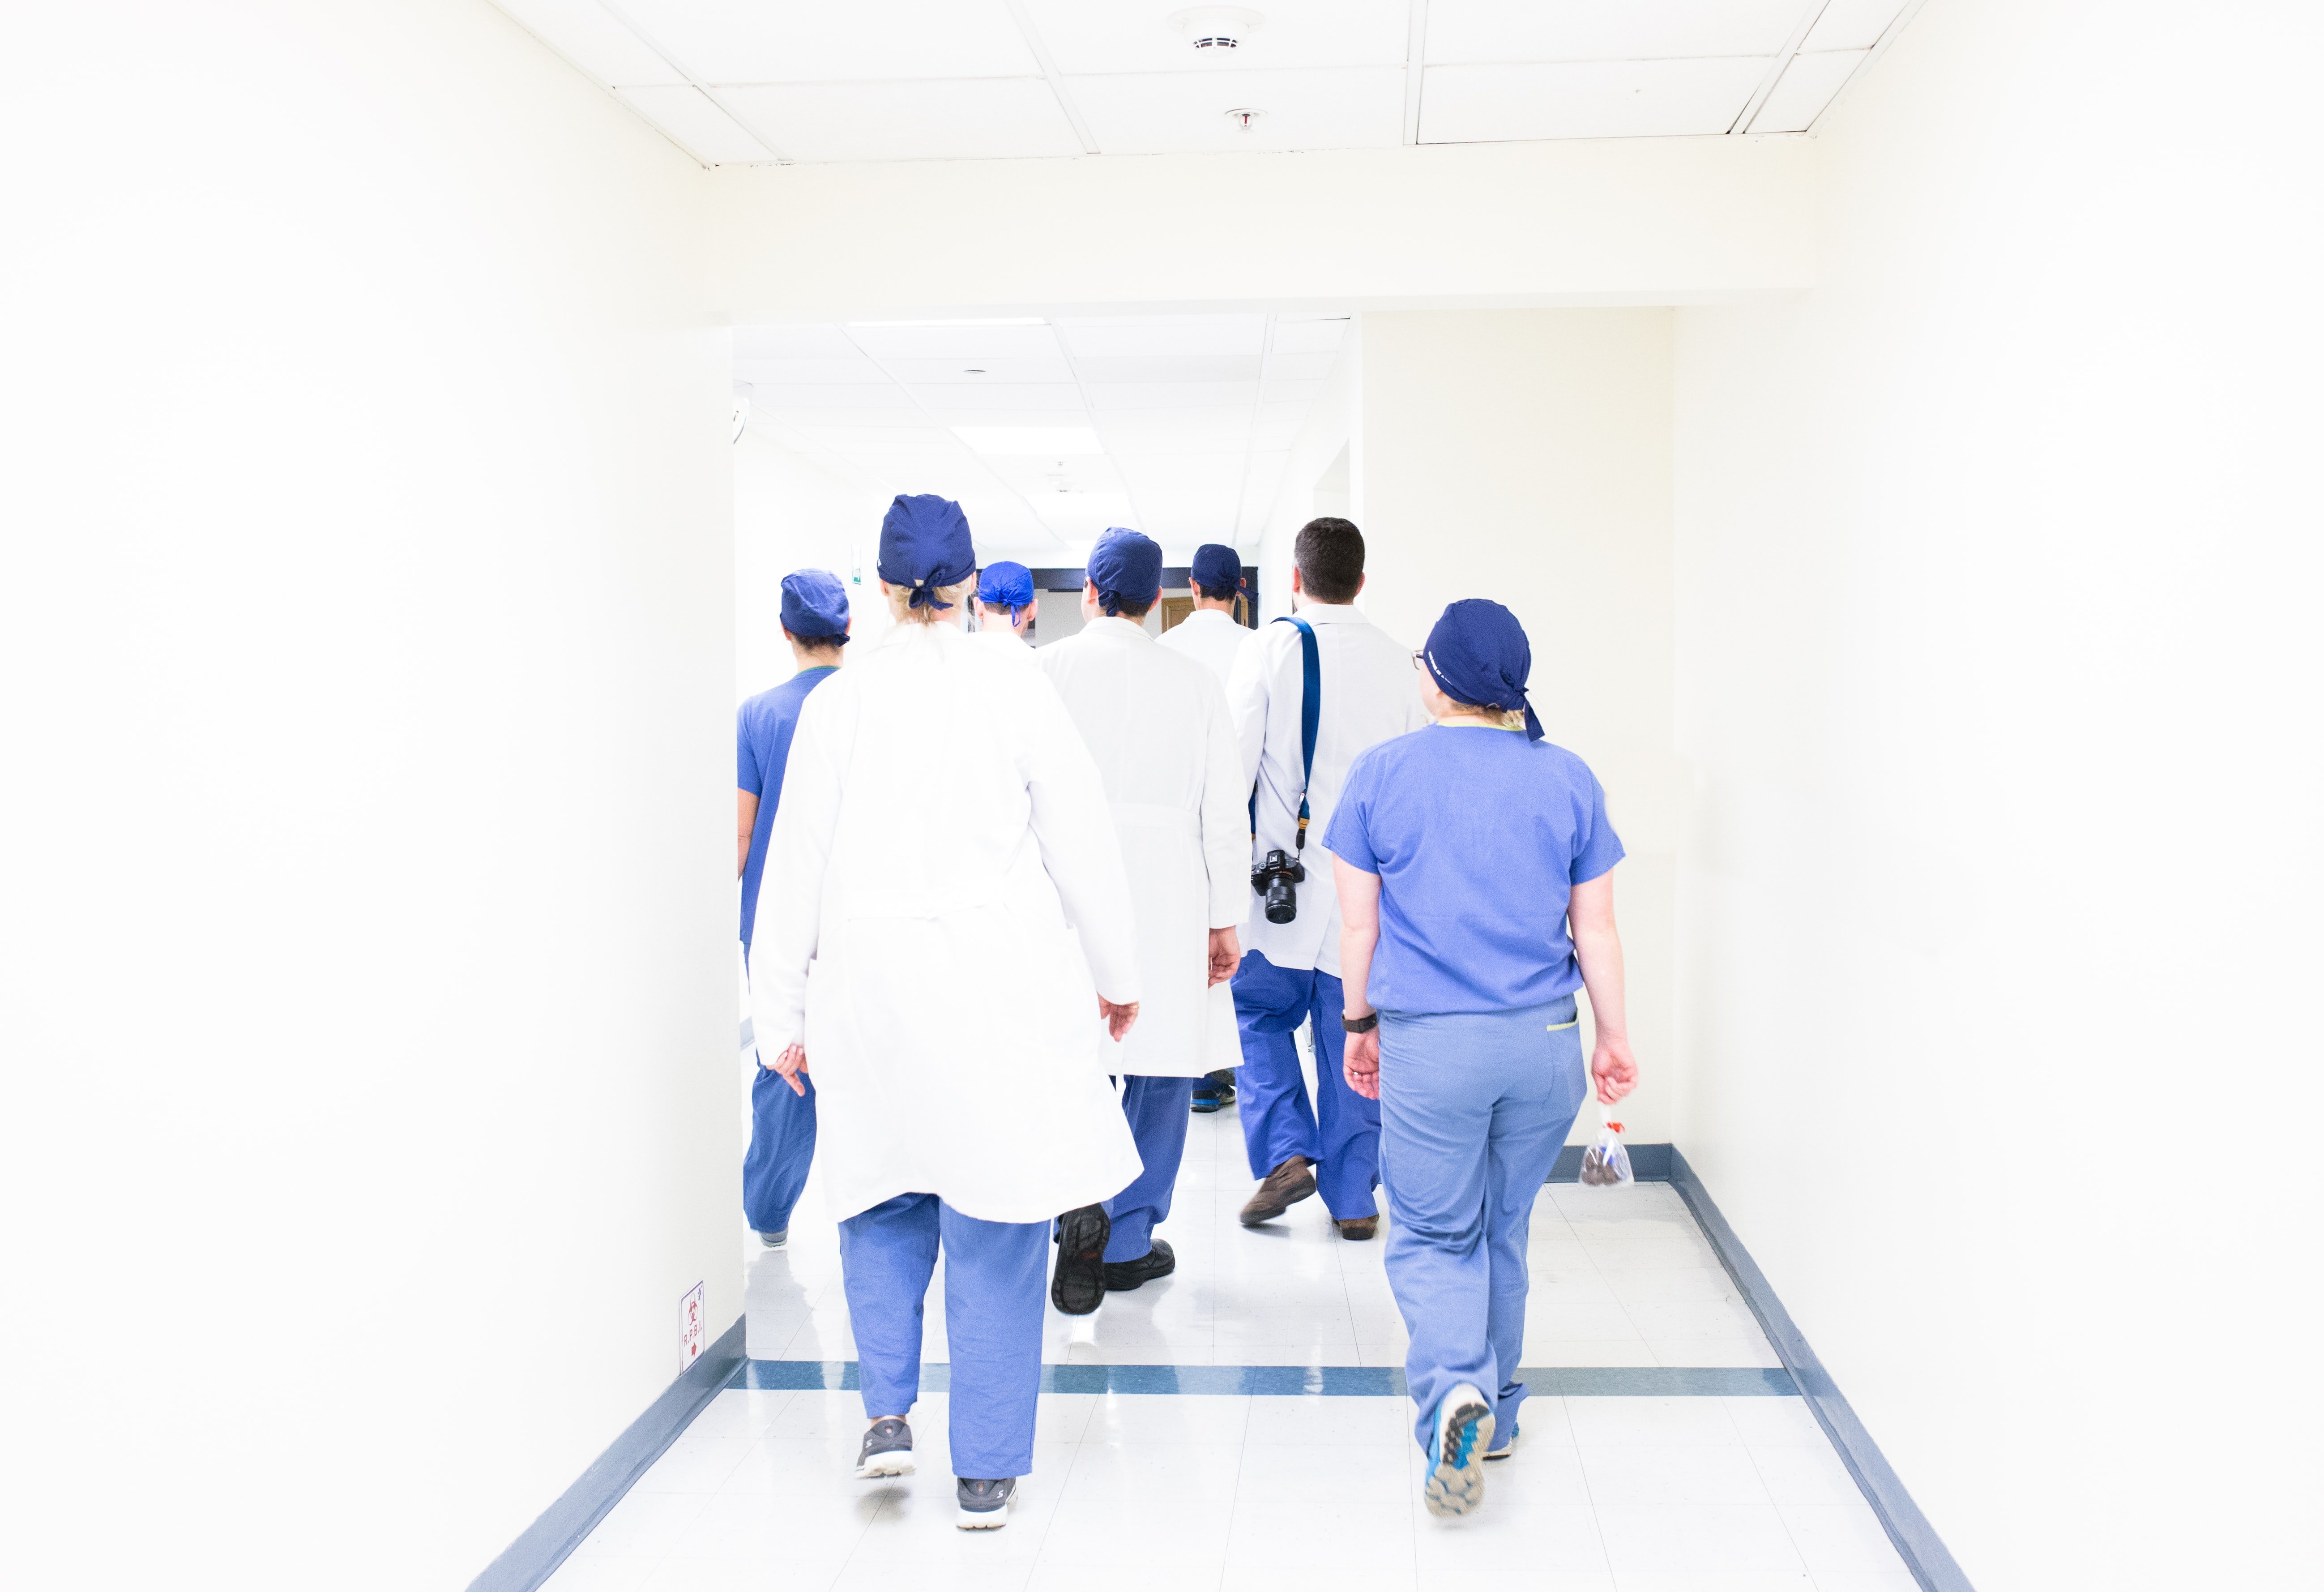 A patient in an emergency was rushed to the hospital. | Source: Unsplash